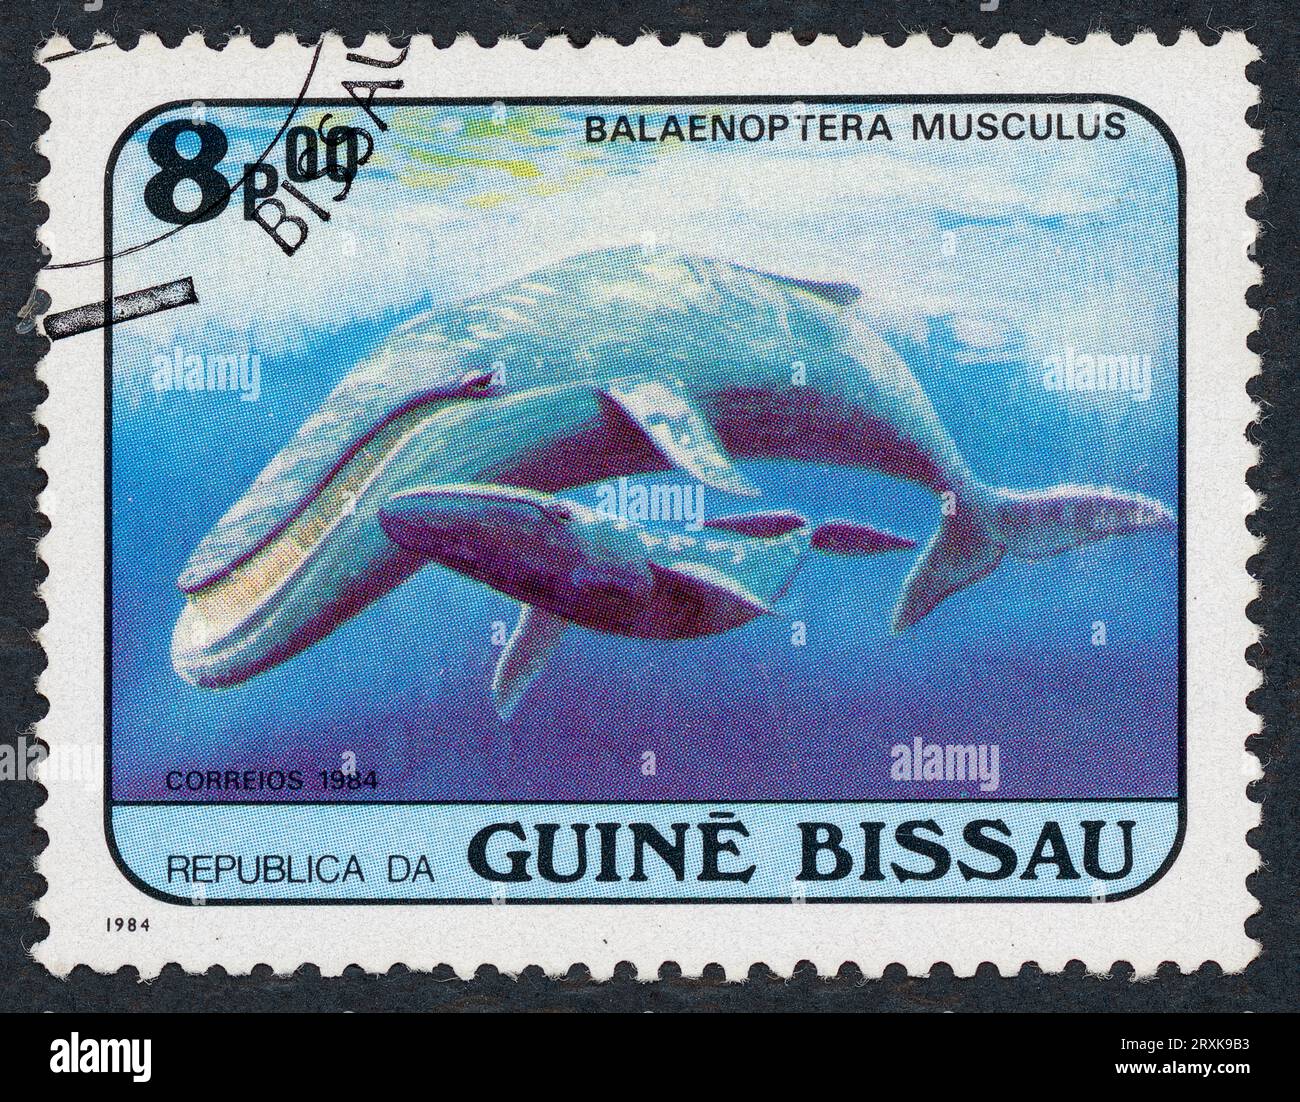 The blue whale (Balaenoptera musculus). Postage stamp issued in Guinea-Bissau in 1984. Stock Photo